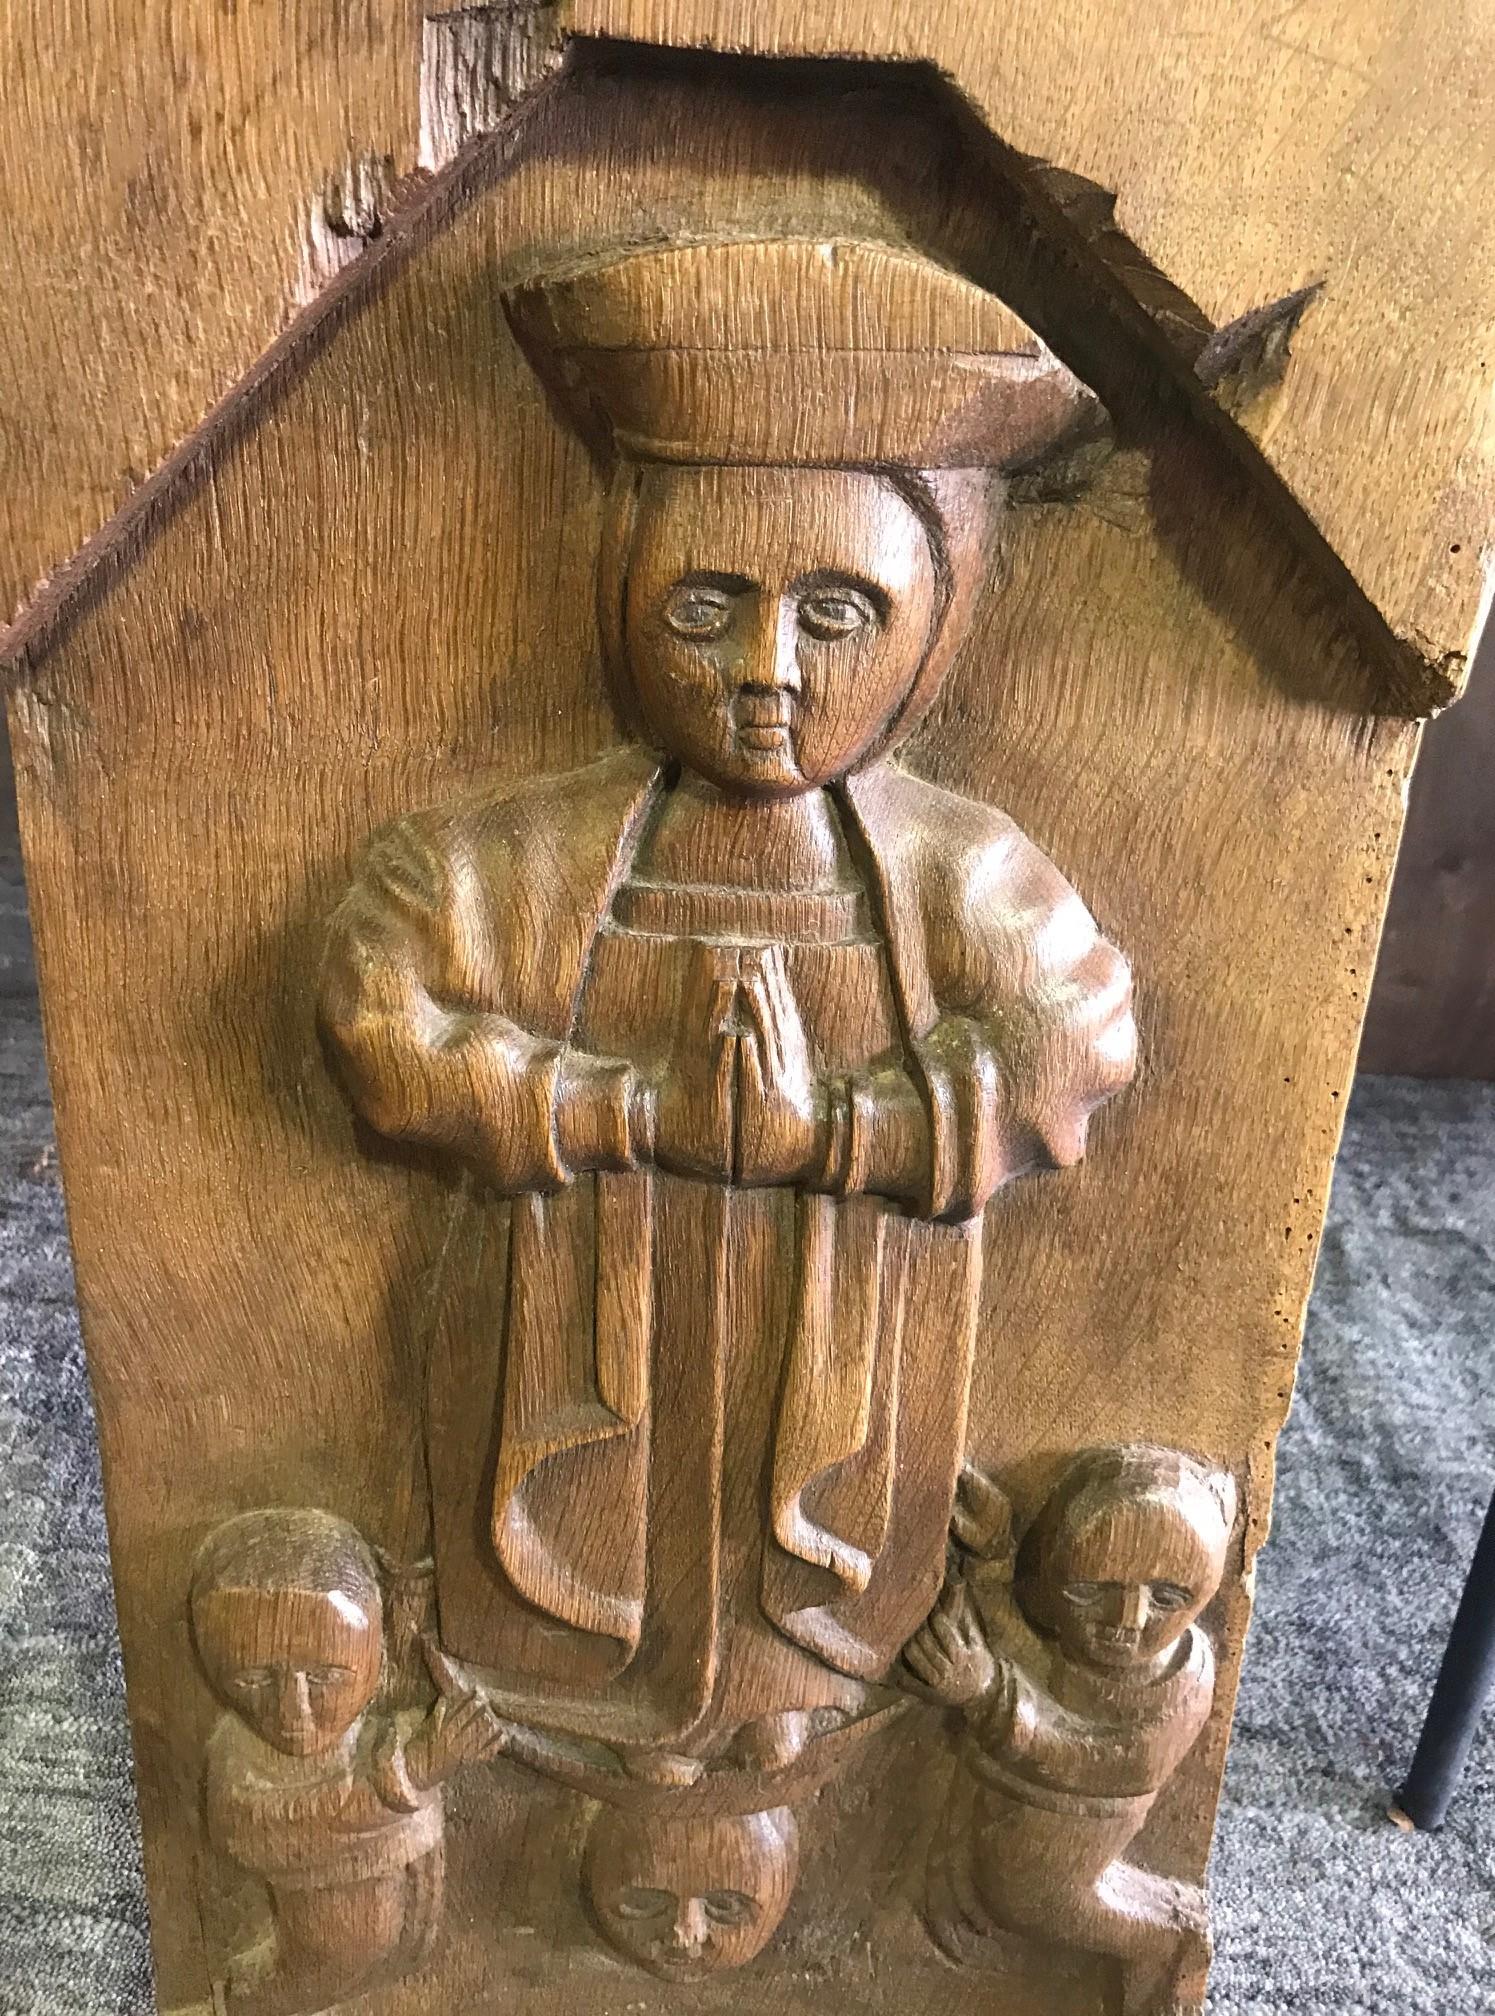 A wonderful, well-carved, heavy work depicting religious figures. Perhaps featured in a church or temple at one time. 

We are listing it as 18th-19th century but could be older.

Dimensions: 25.5